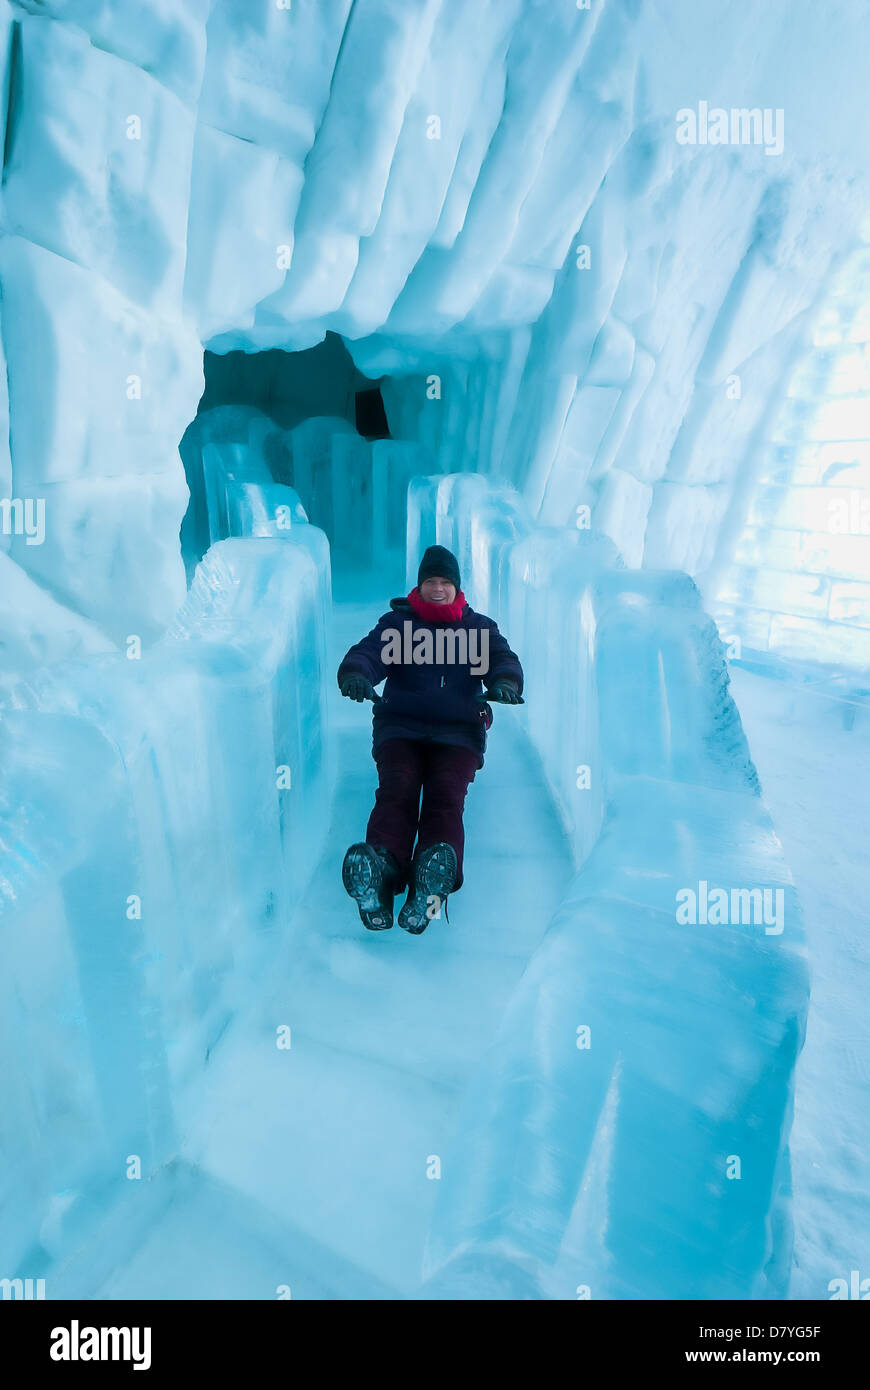 Woman slides down the ice slide, Hotel de Glace, Ice Hotel, Quebec City, Quebec, Canada. Stock Photo